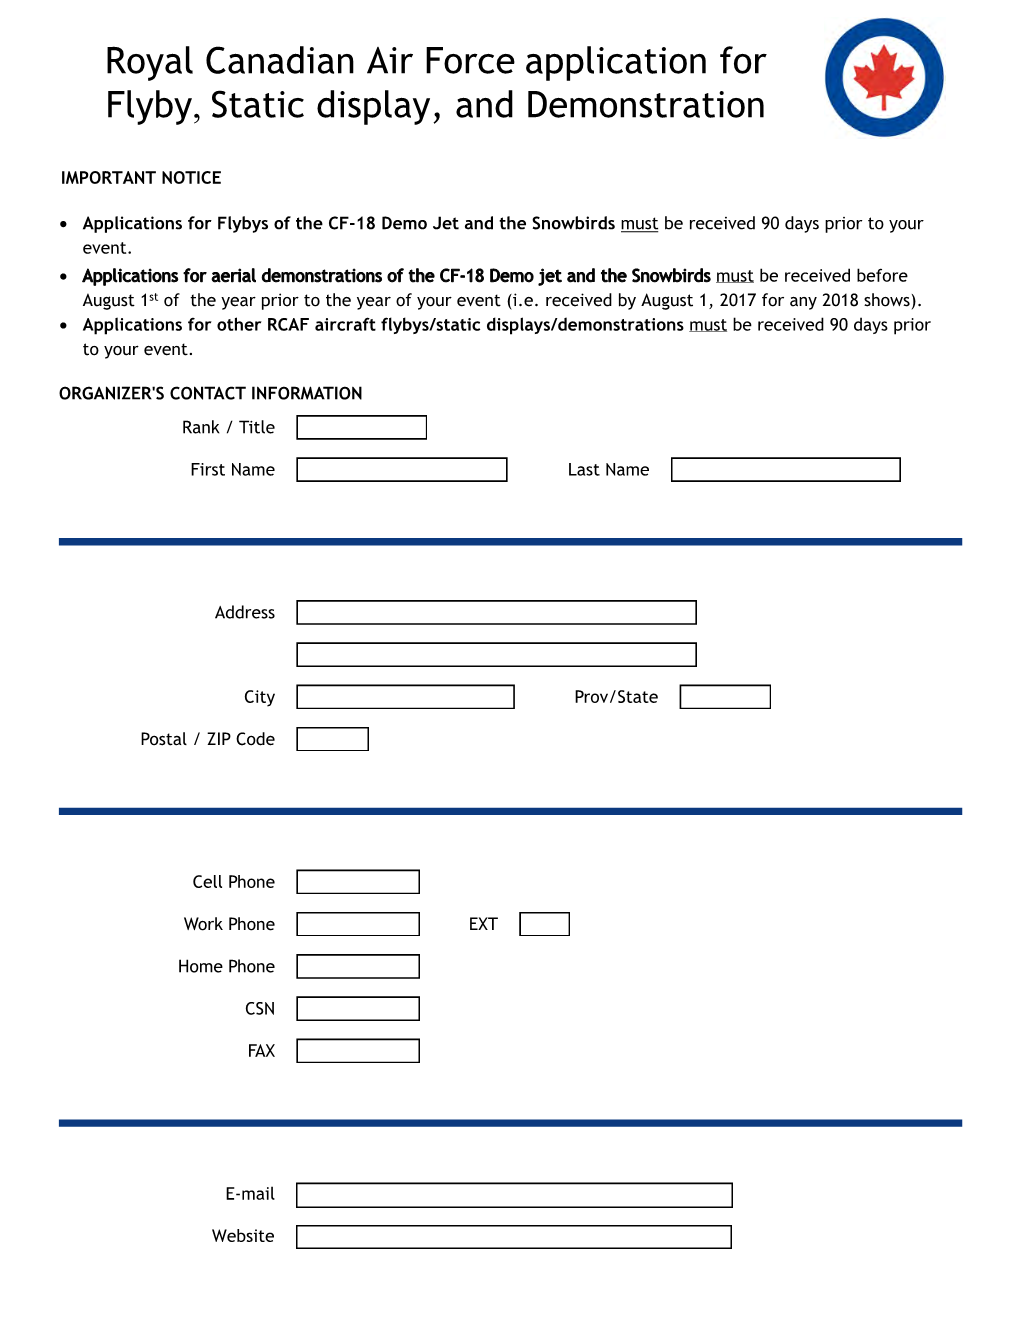 Royal Canadian Air Force Application for Airshows, Flybys, and Static Support